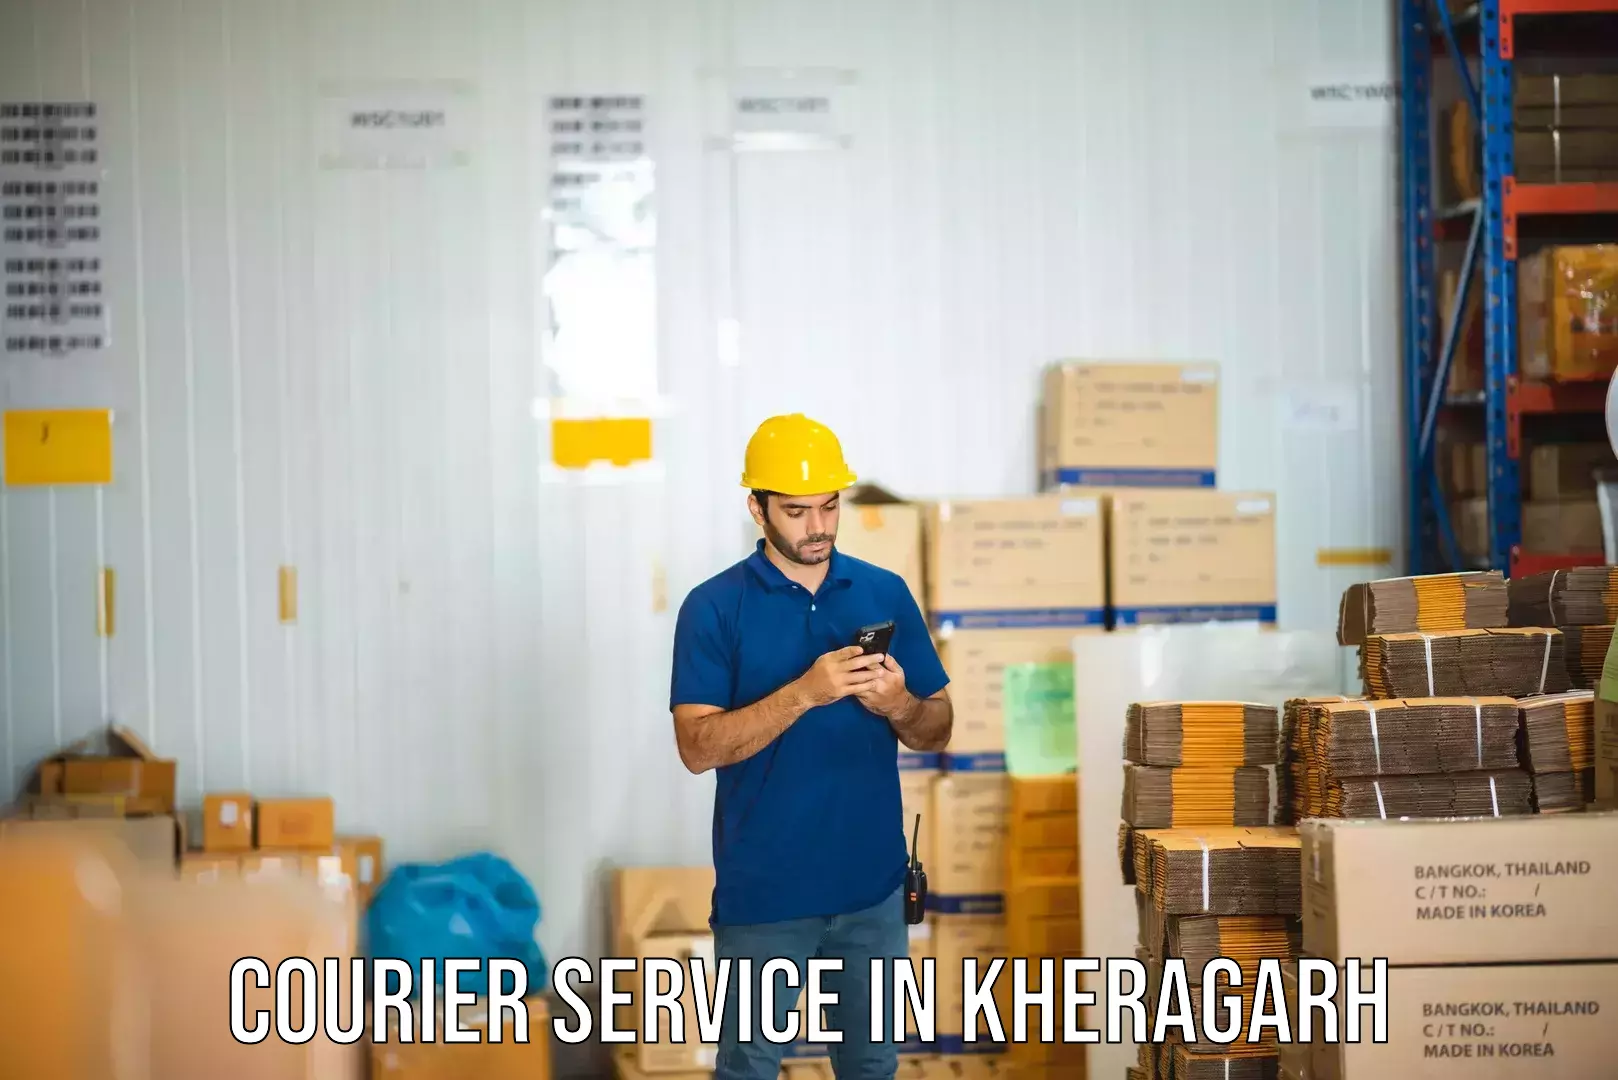 Automated parcel services in Kheragarh